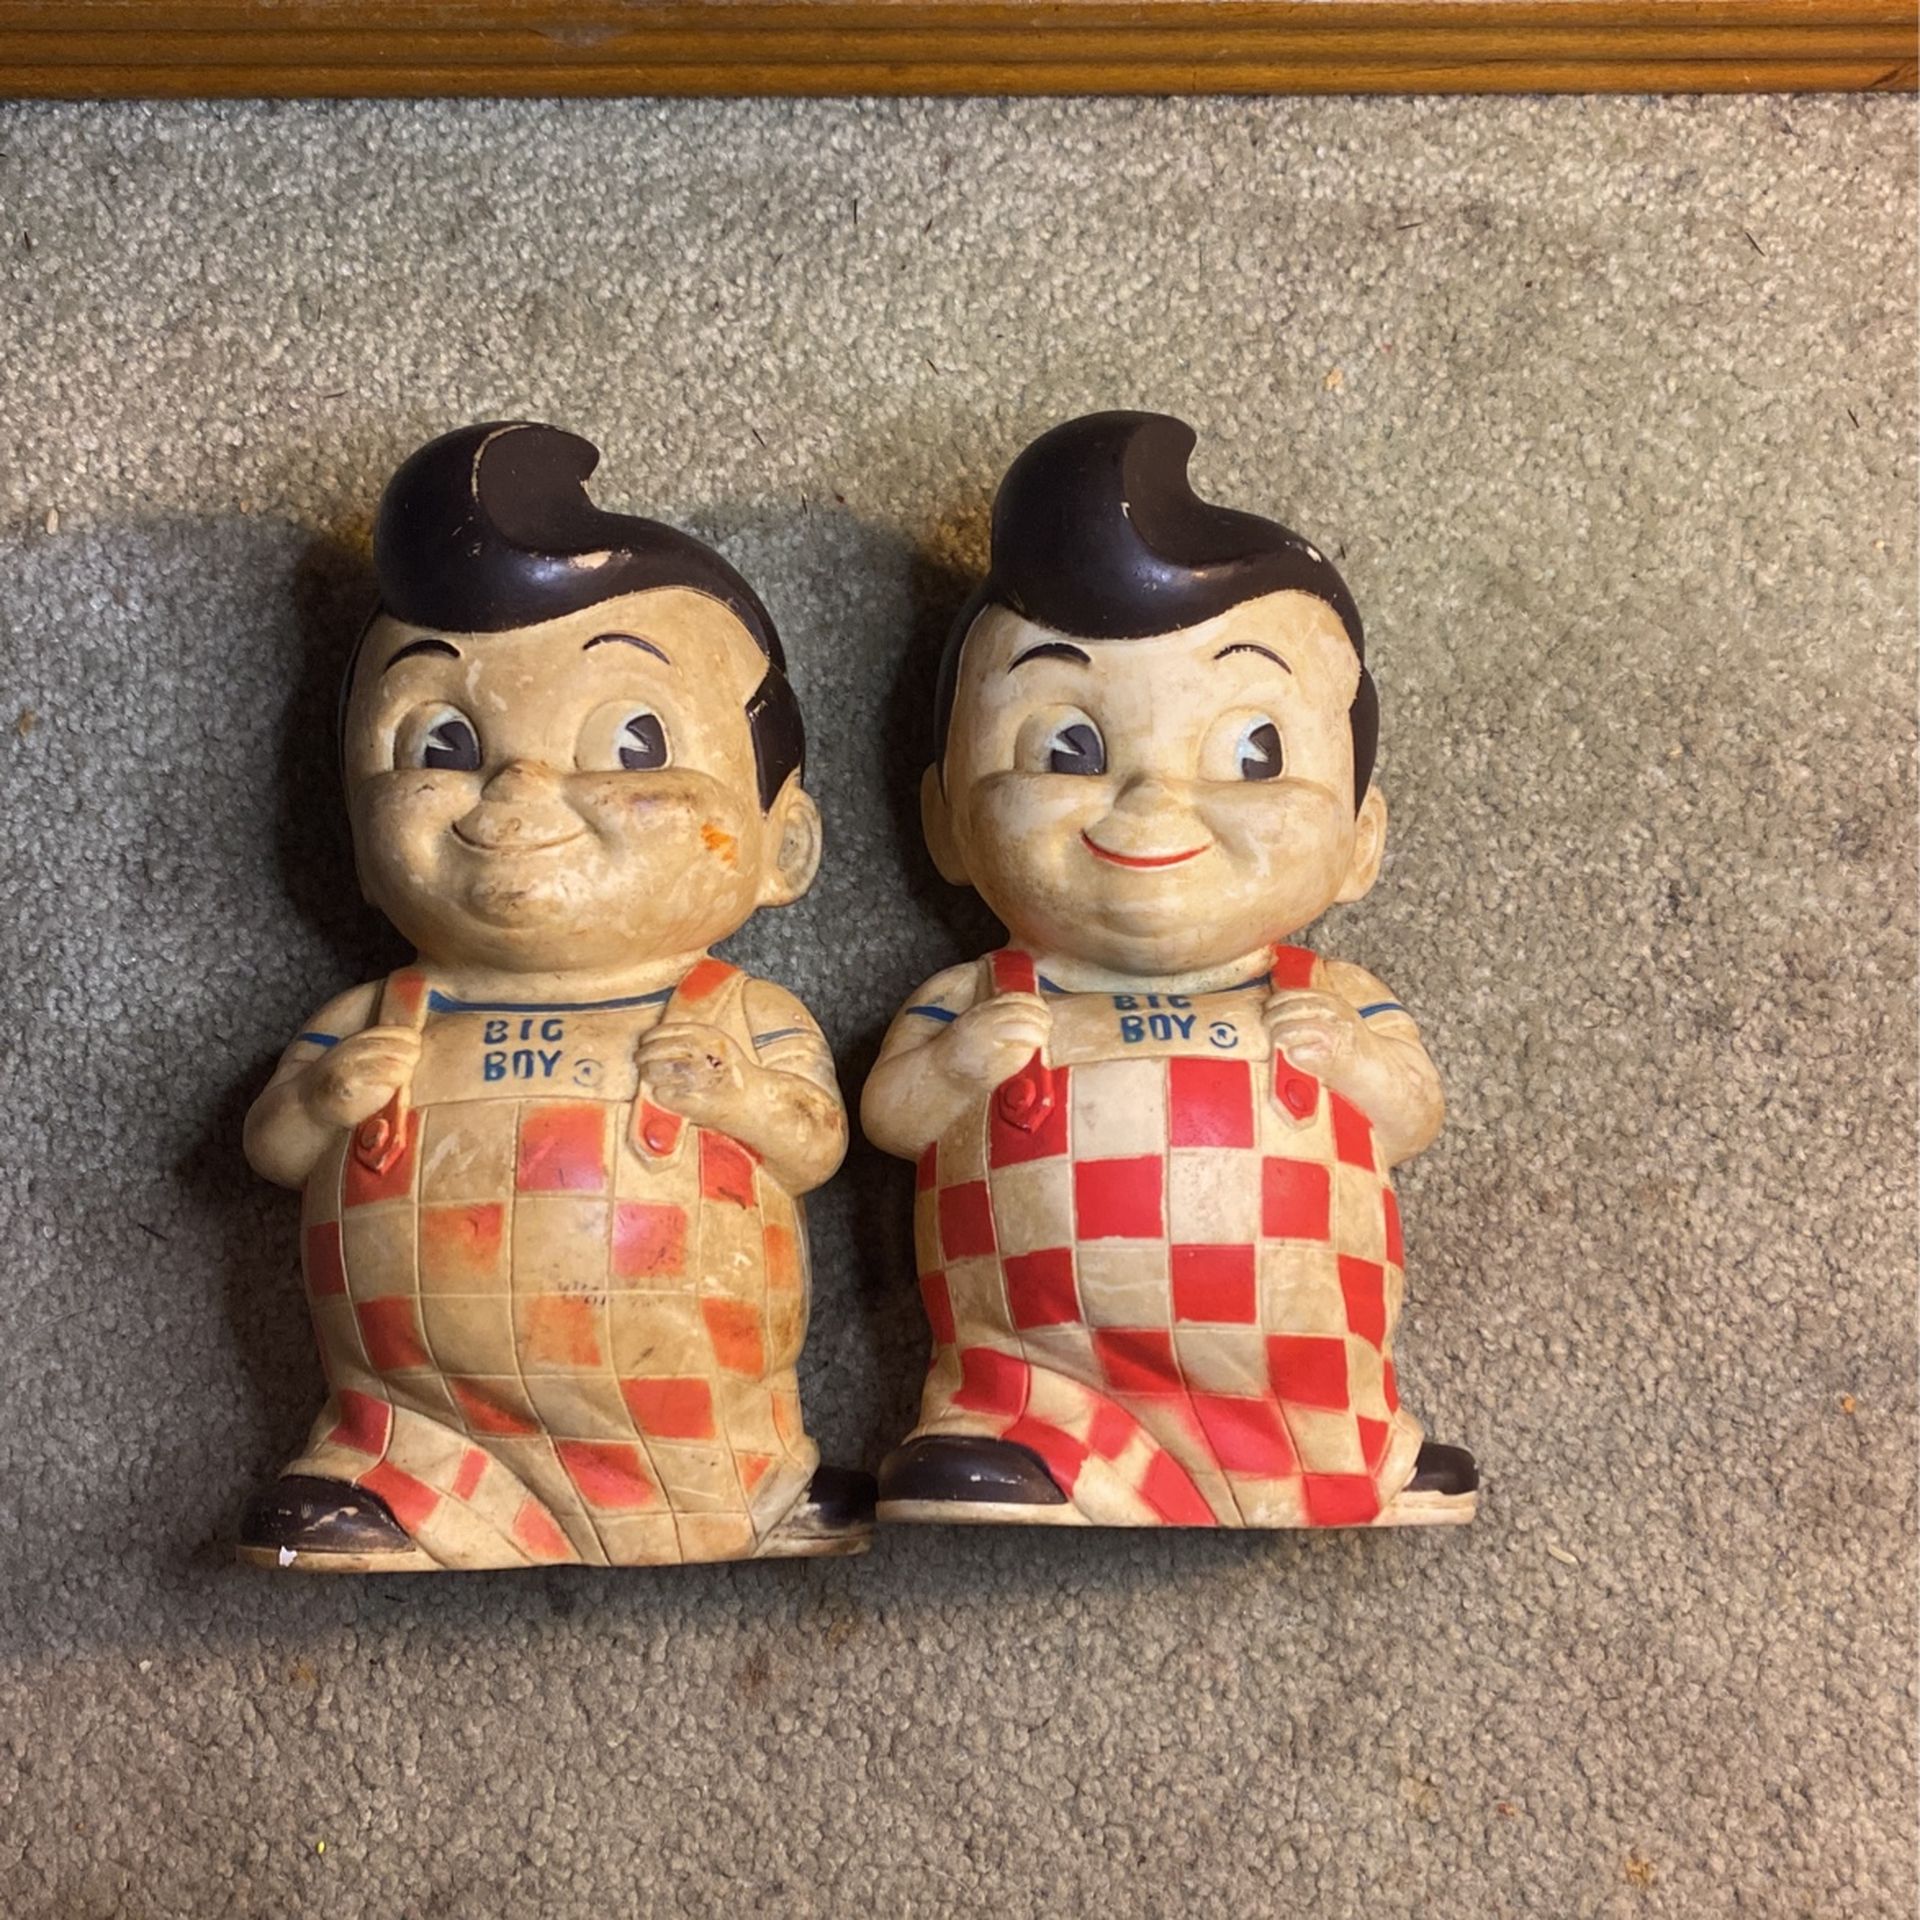 Two Big Boy Piggy Banks With Old Pennies Still Inside